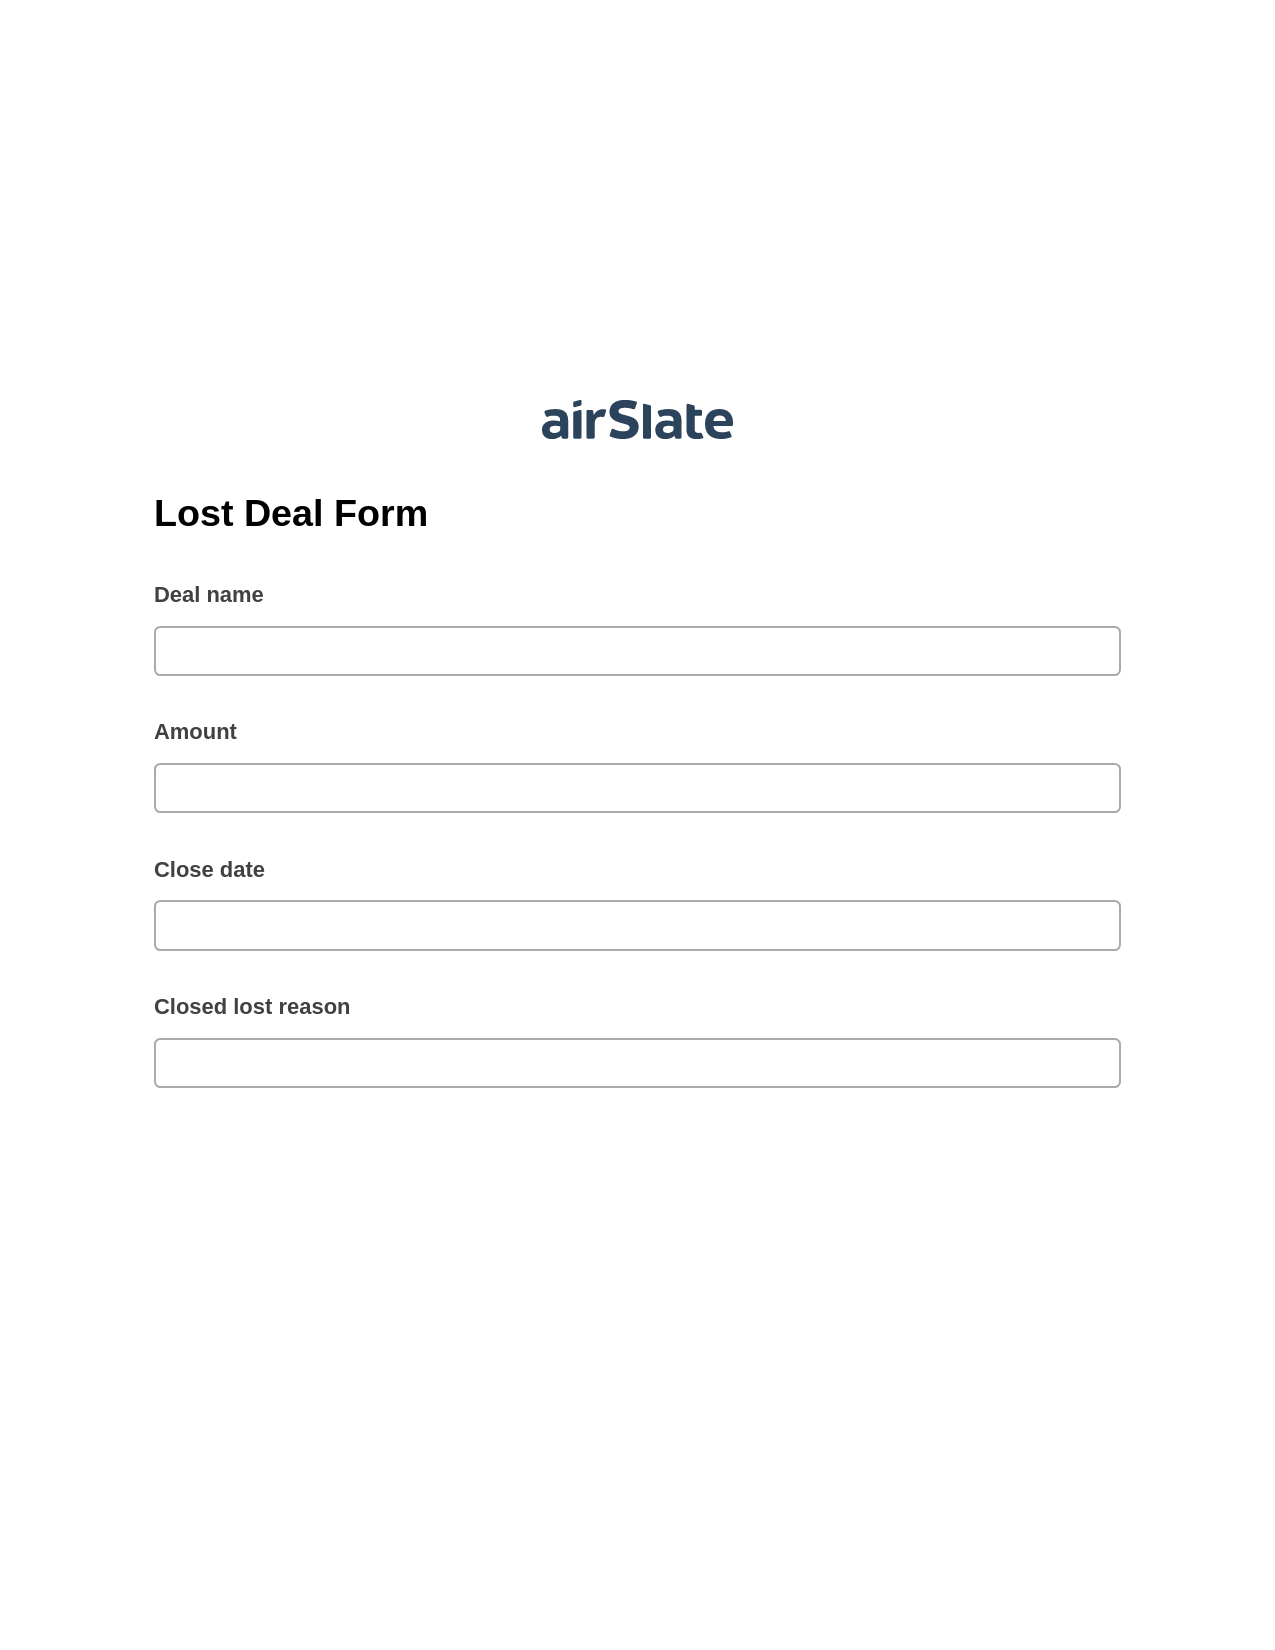 Lost Deal Form Pre-fill from MS Dynamics 365 Records, Add Tags to Slate Bot, Archive to SharePoint Folder Bot